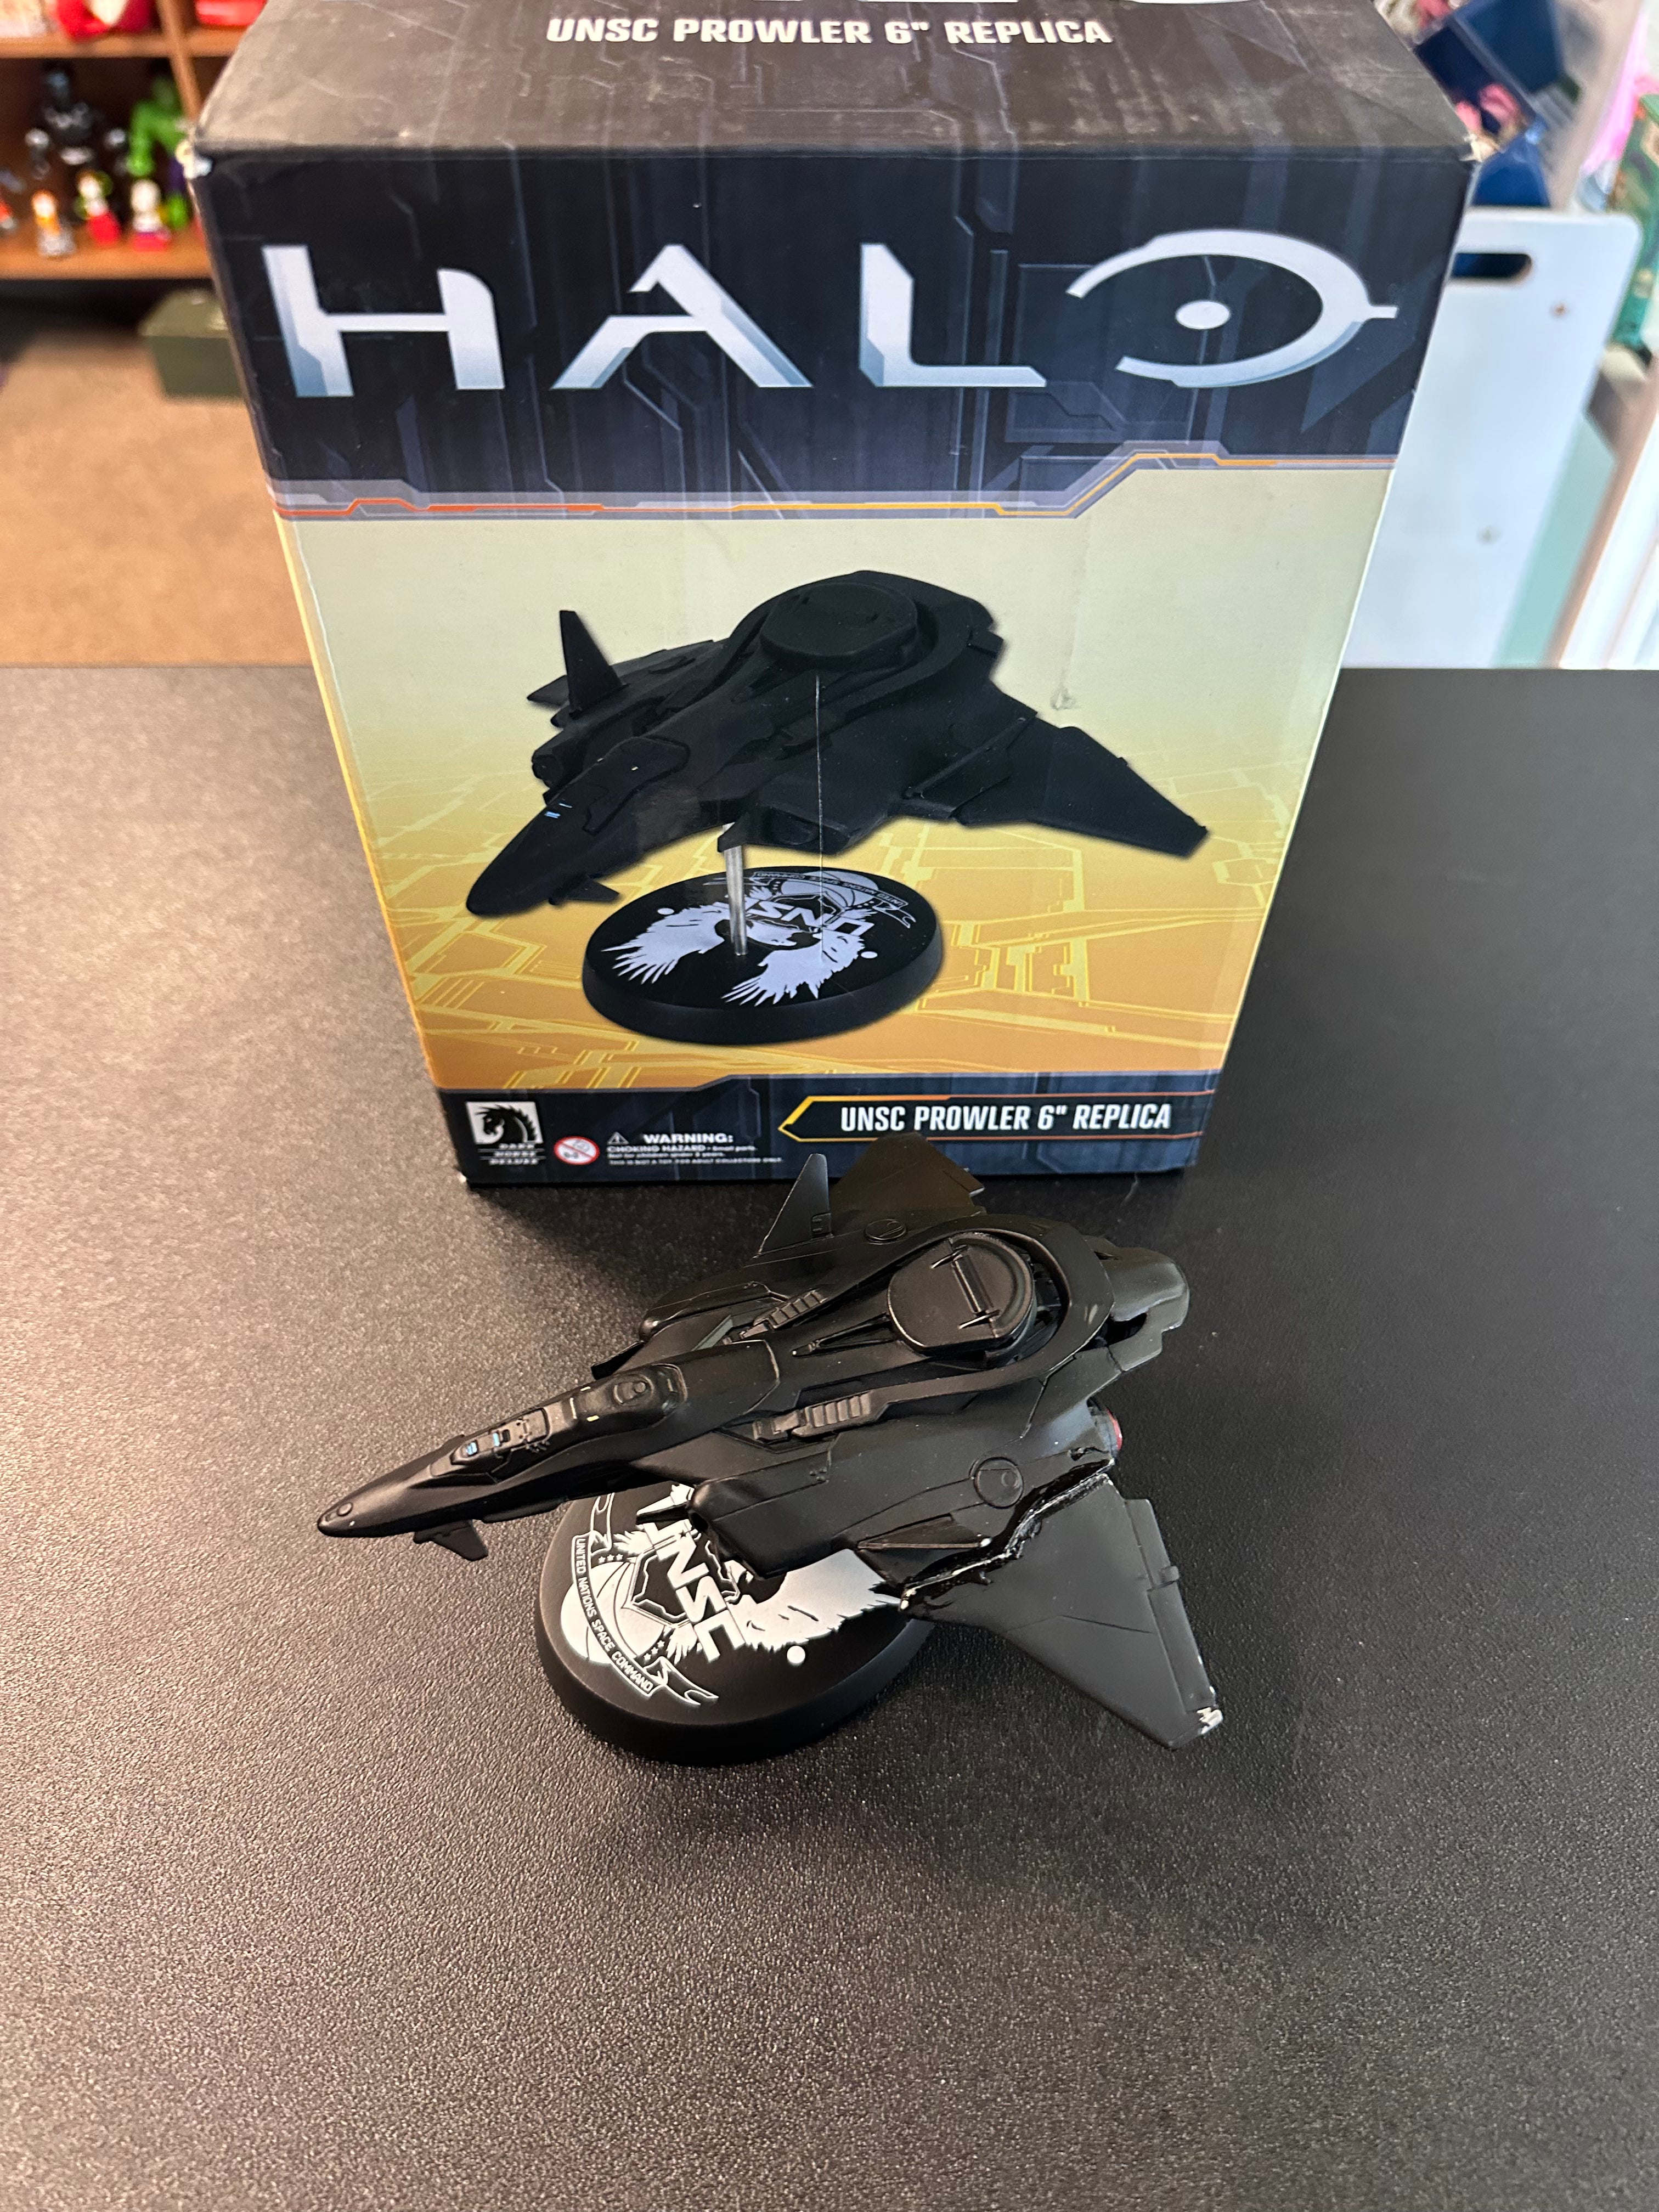 HALO UNSC PROWLER 6” REPLICA DAMGED BROKEN – Hitchhiker Toys